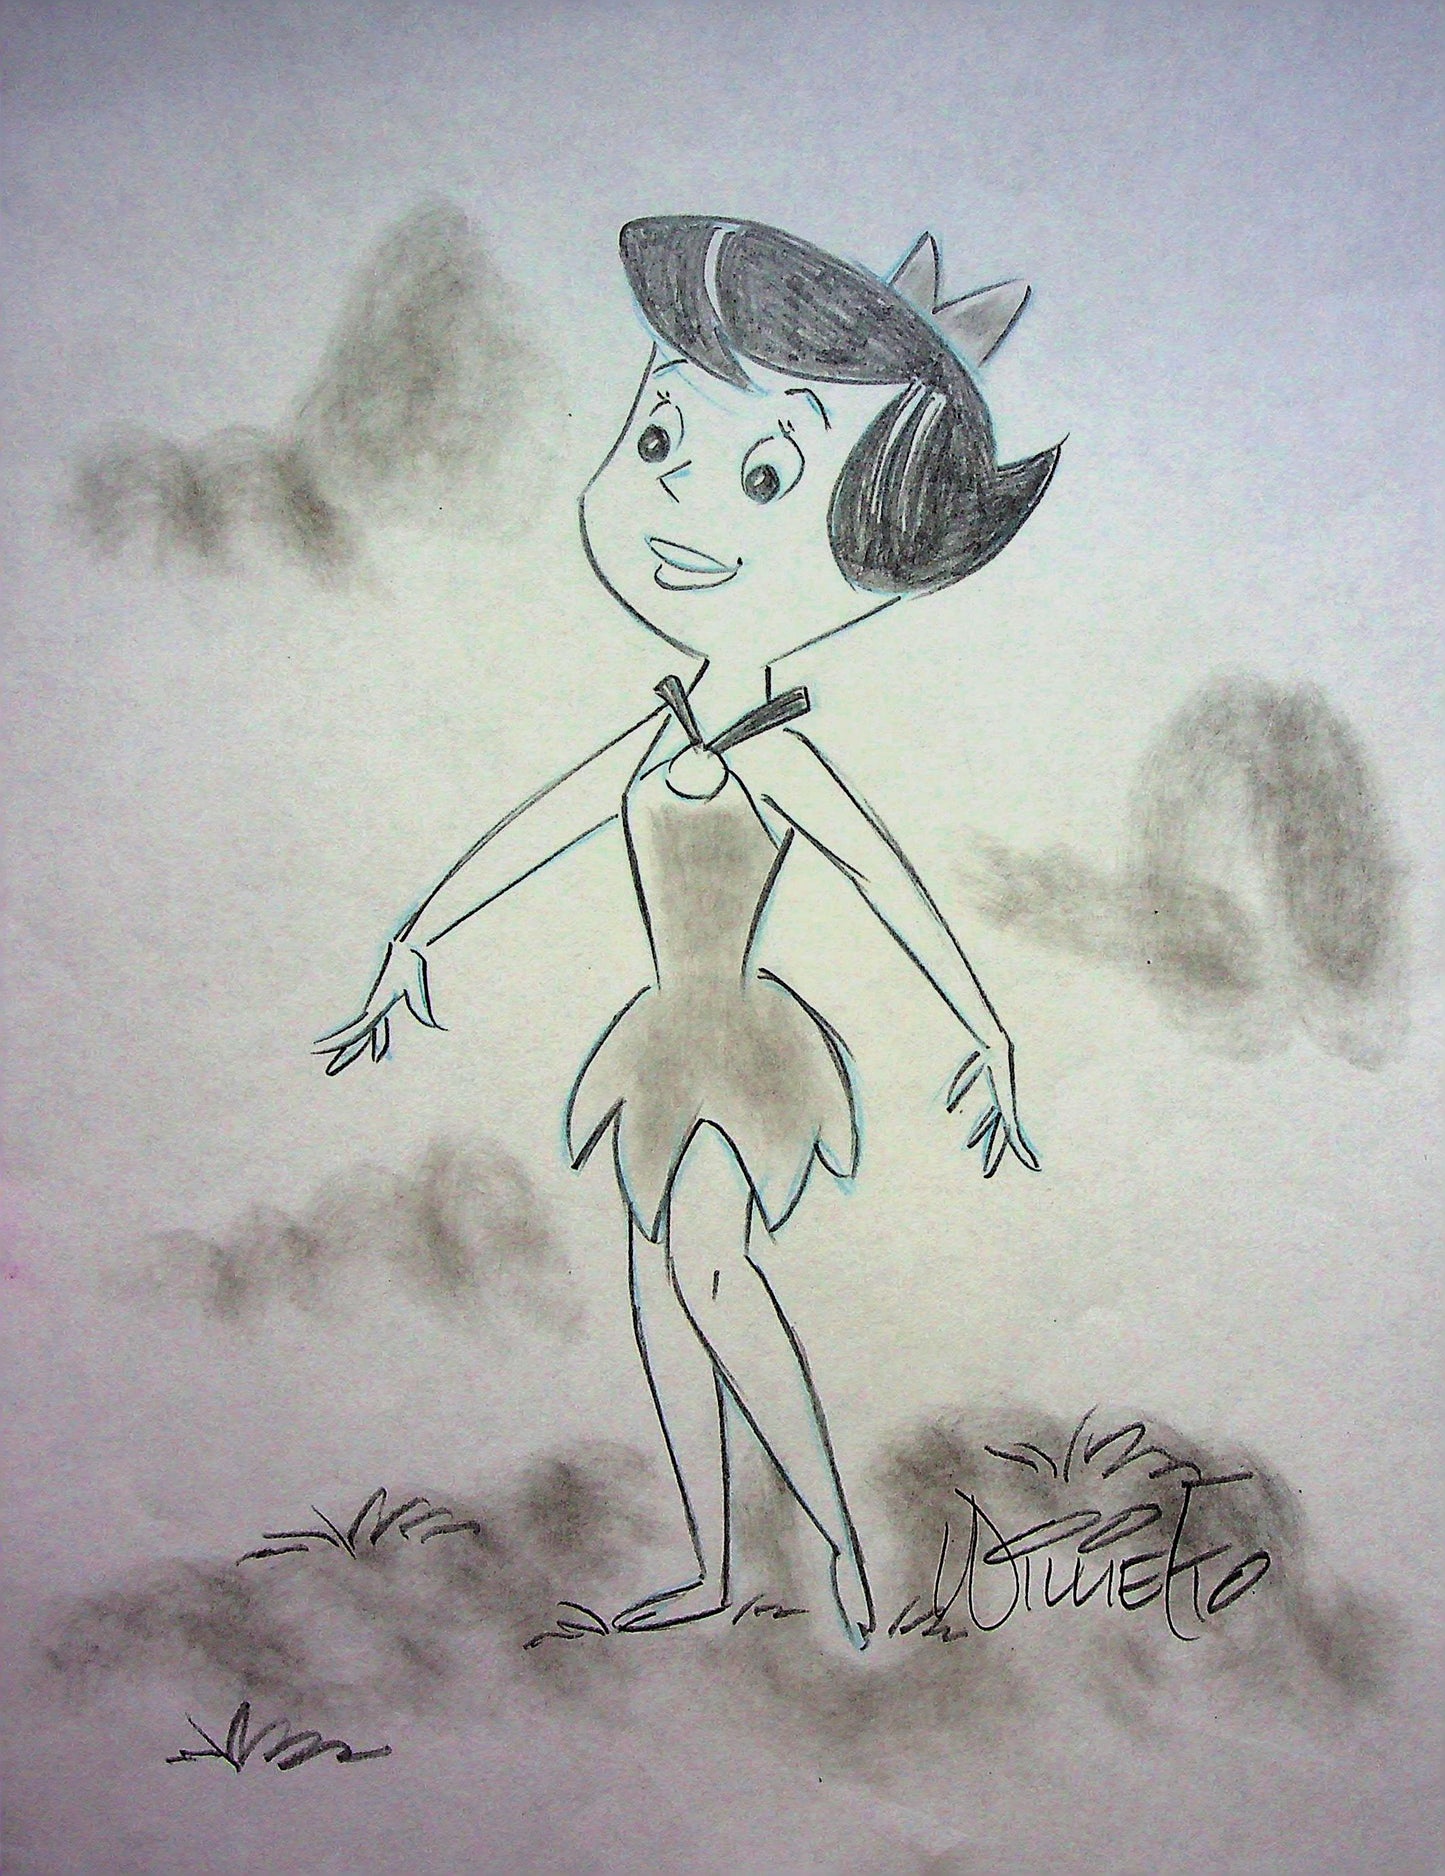 BETTY - THE FLINTSTONES Willie Ito Signed Hand Drawn Pencil Animation Art 8"x11"